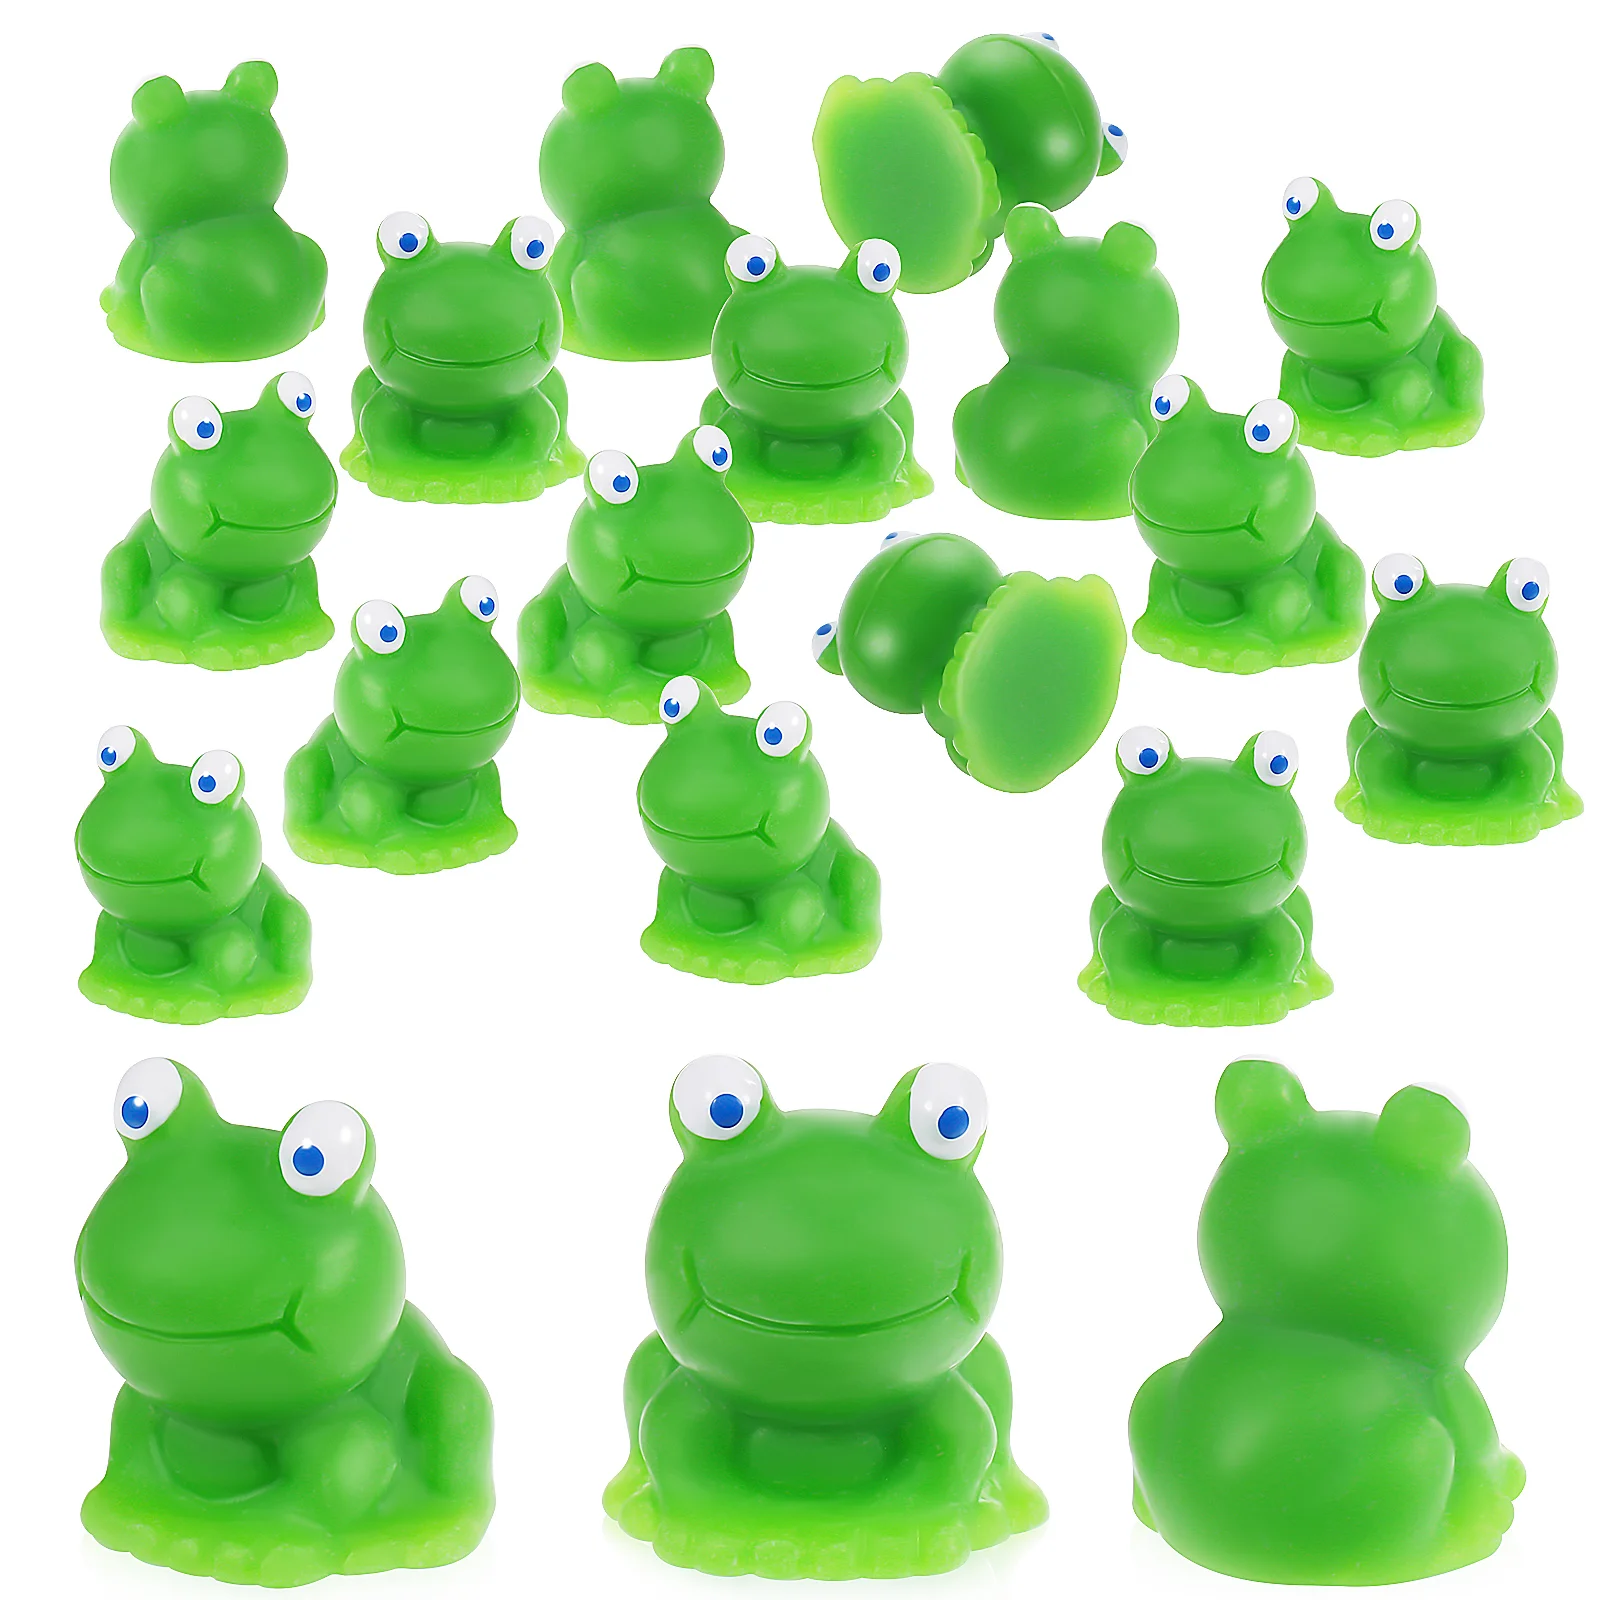 

Little Frog Frogs Adornments Decors Small Ornaments Statues Landscape Toy Figurines Miniature Model